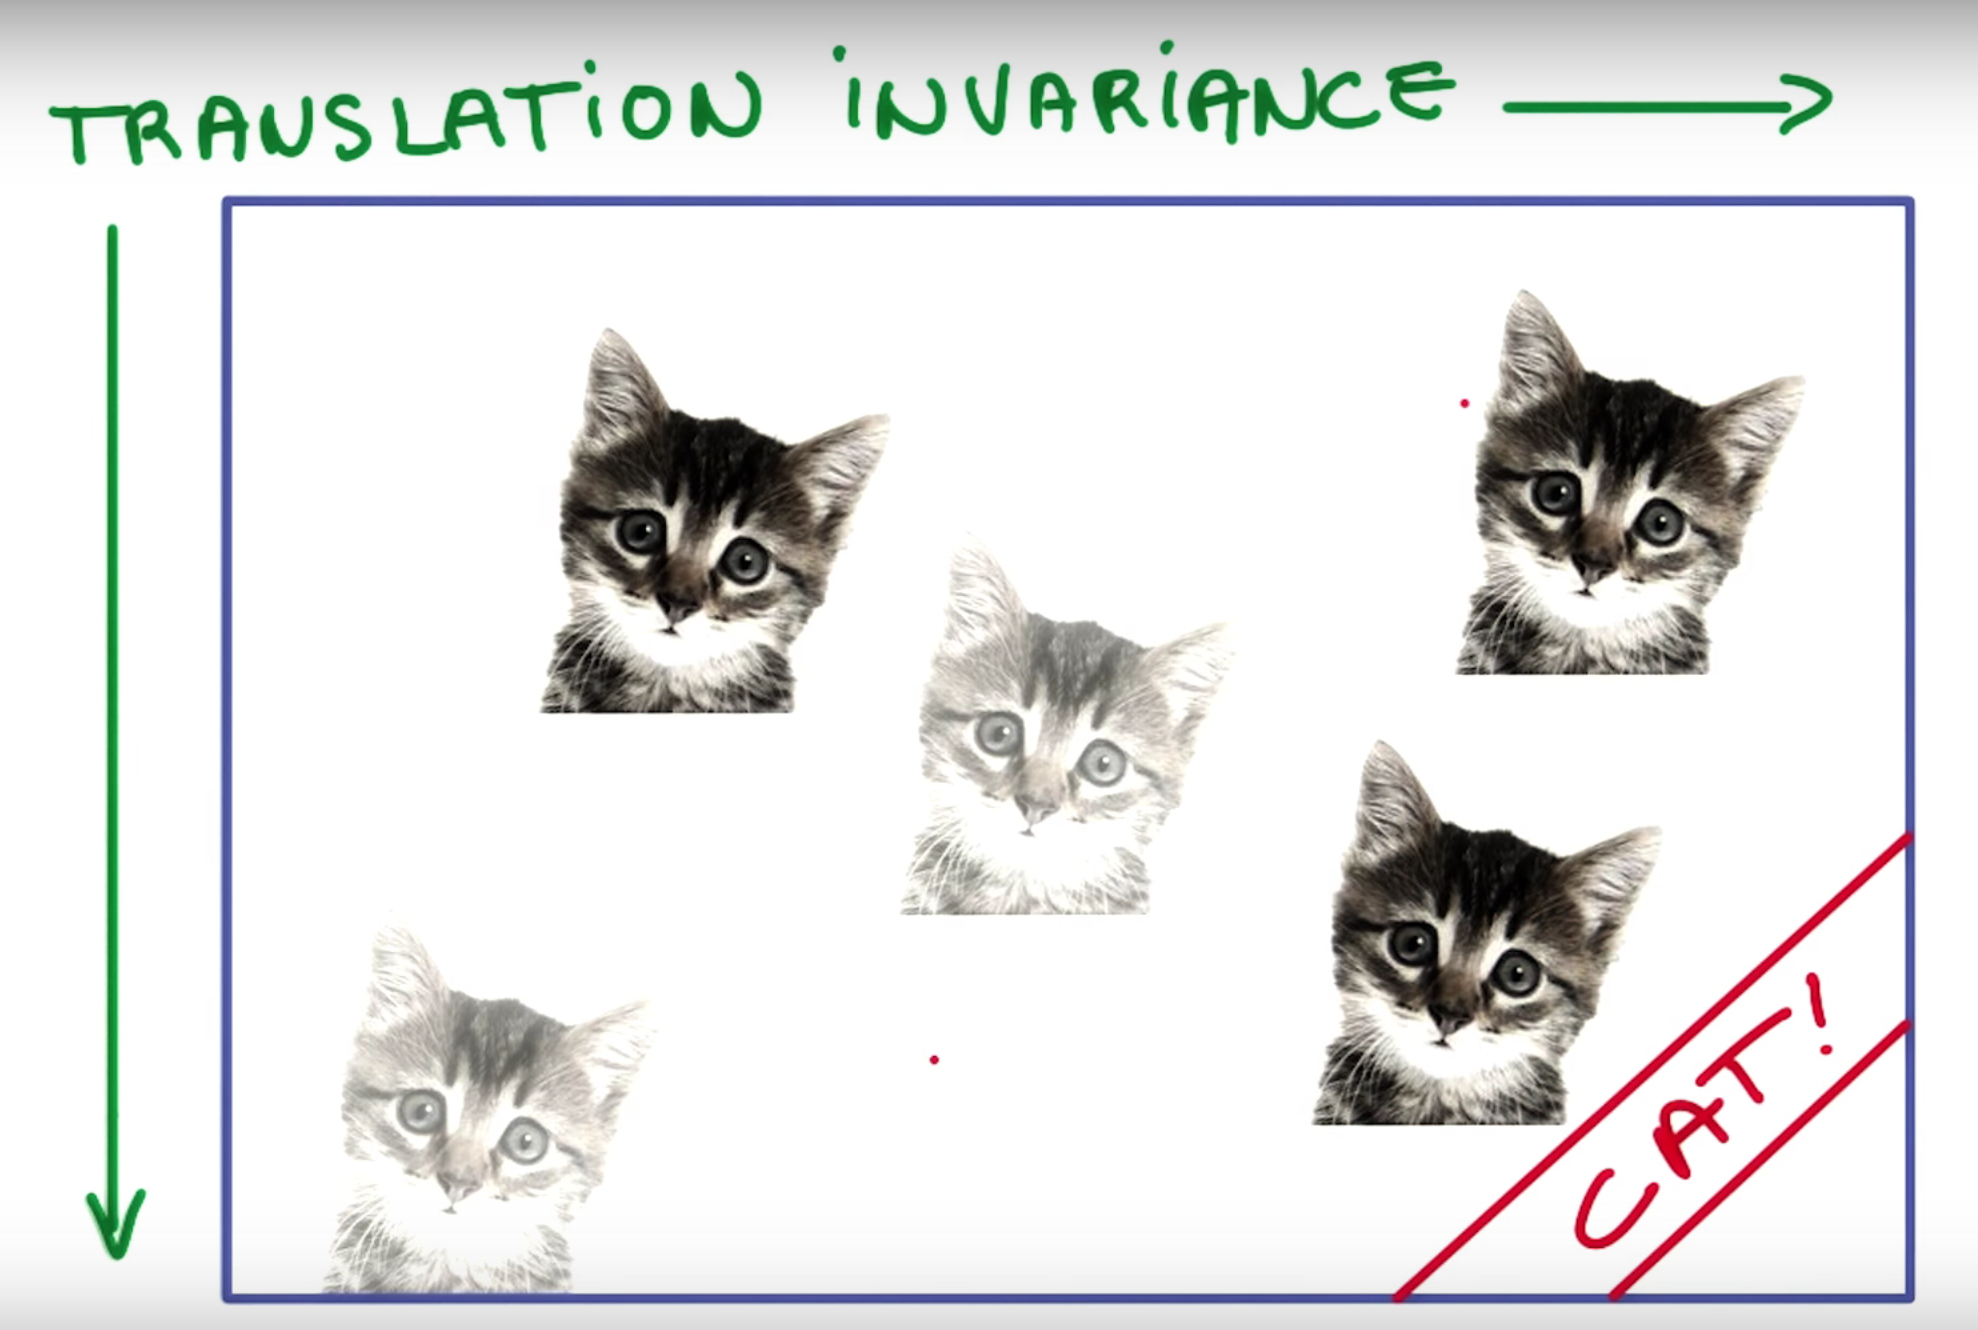 Translation invariance, from Udacity Course 730, Deep Learning (L3 Convolutional Neural Networks > Convolutional Networks)